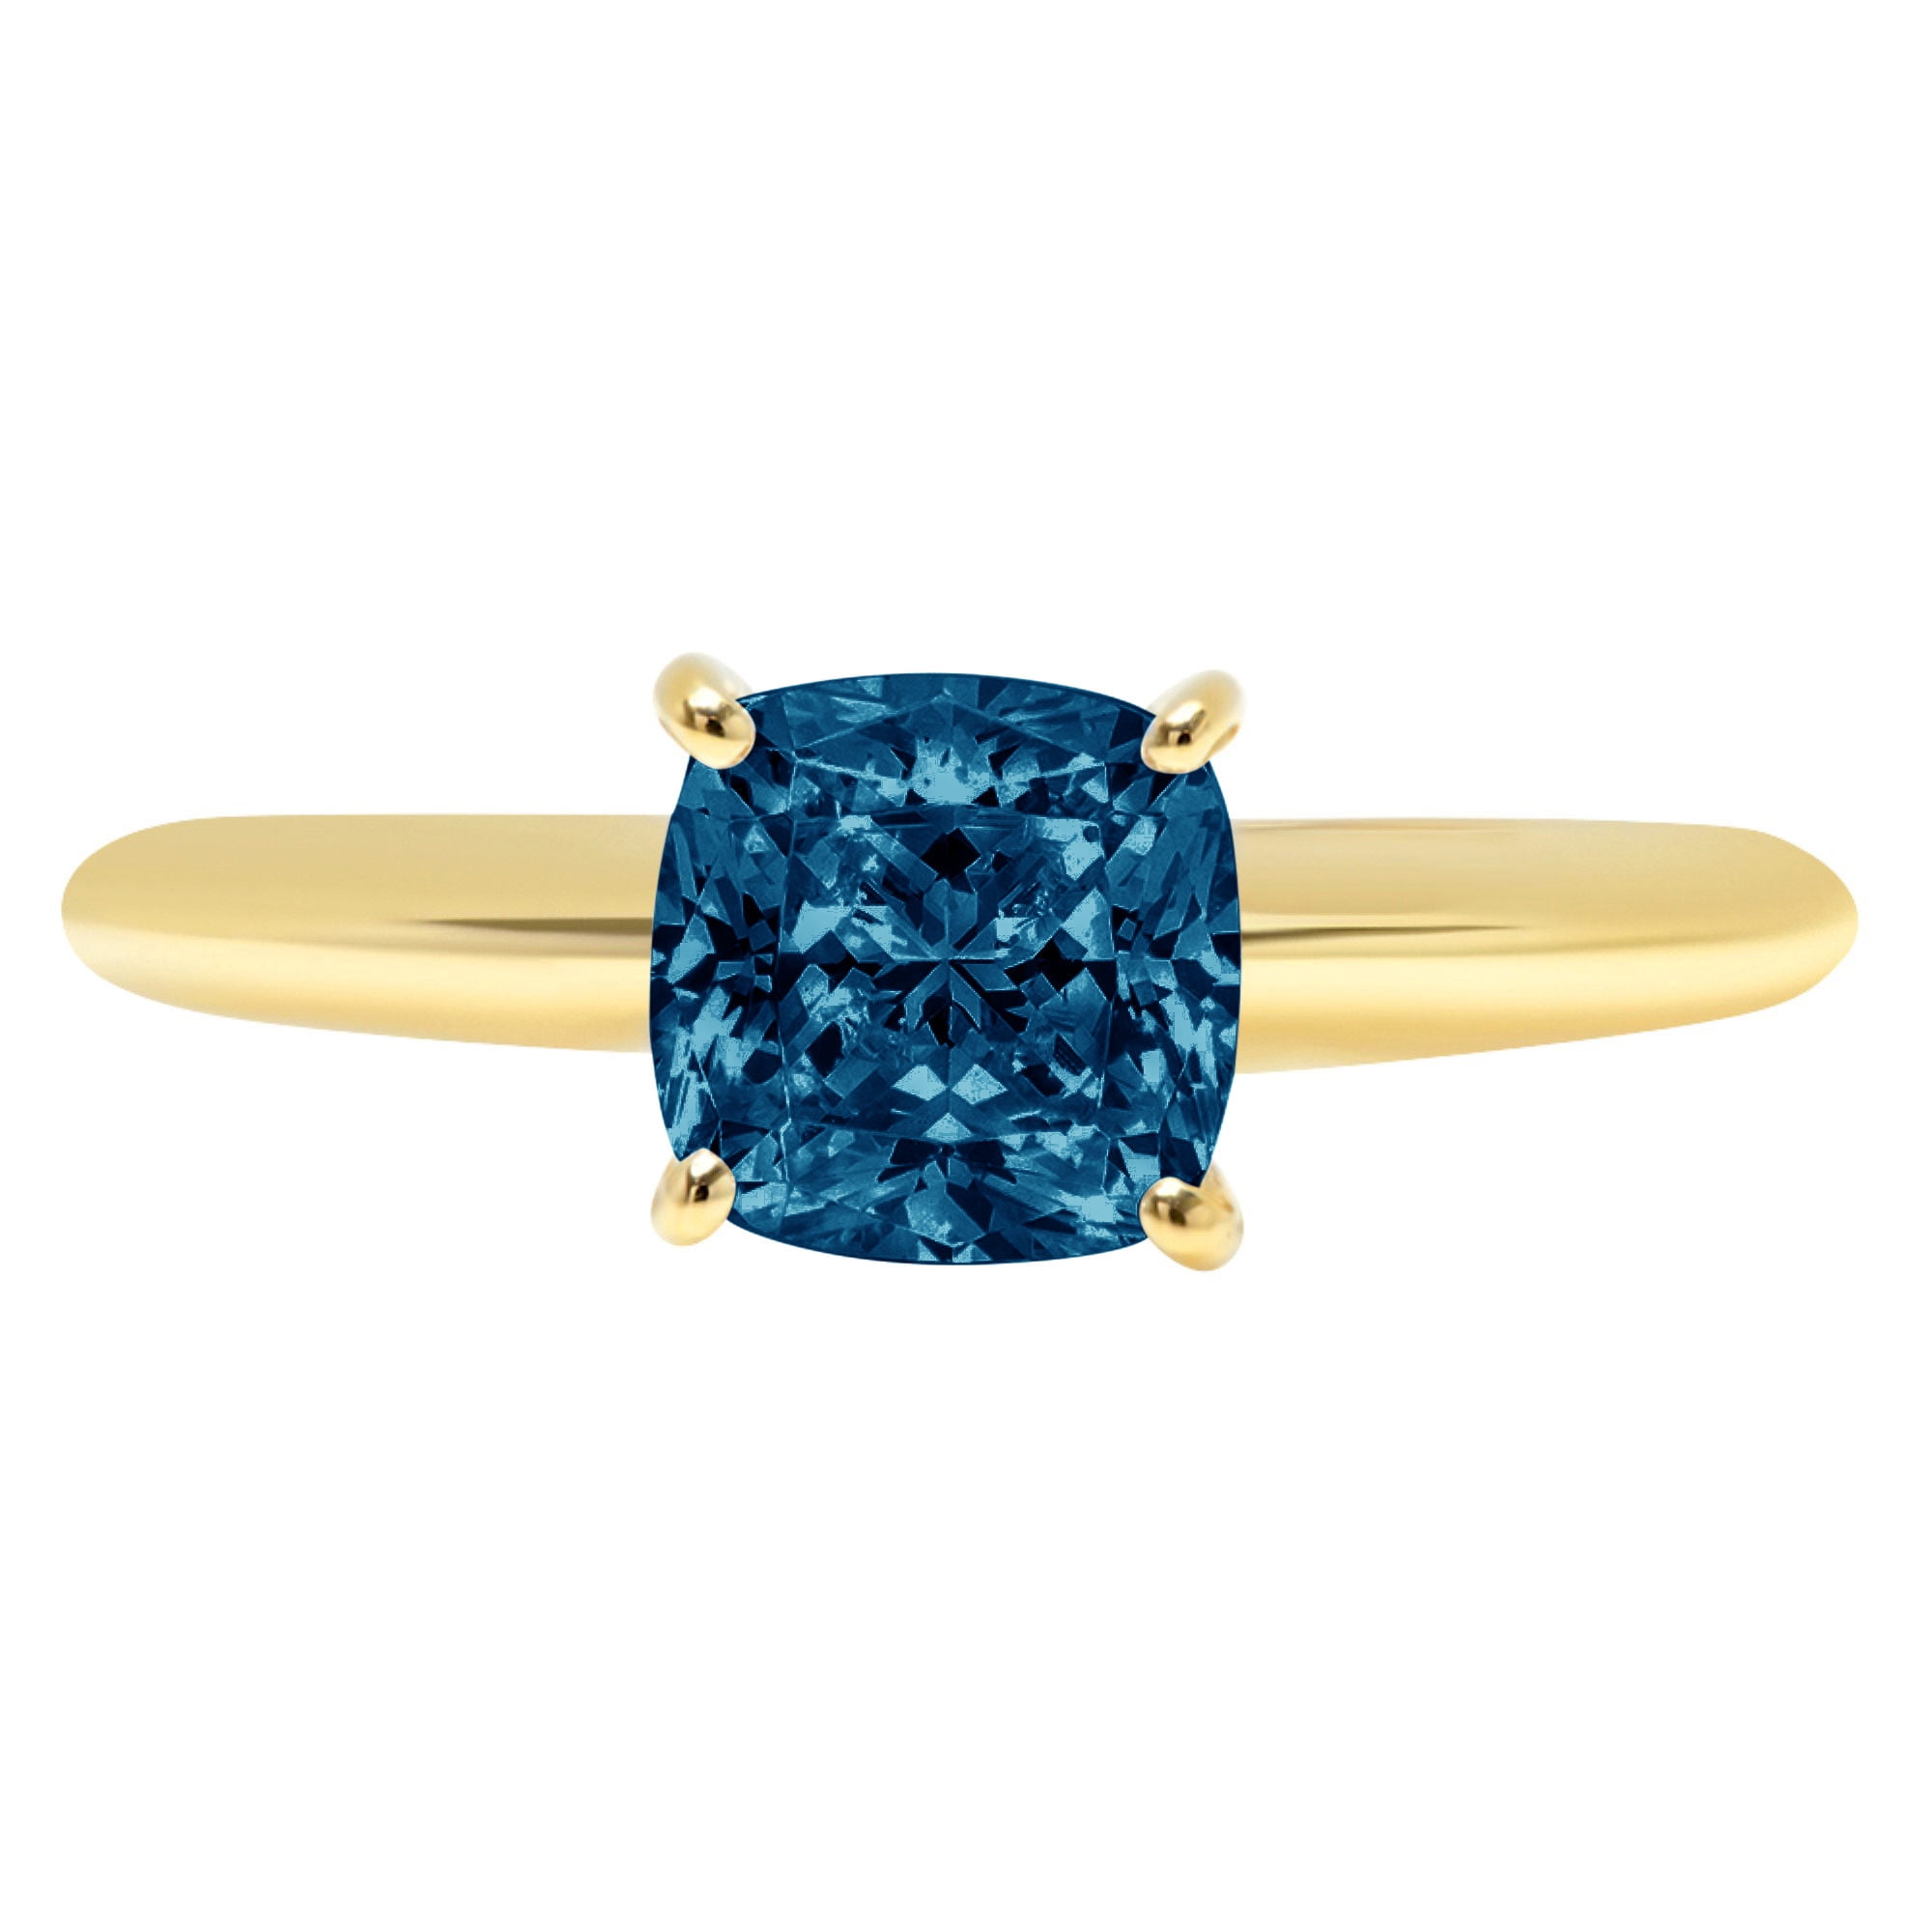 1.5 ct Brilliant Cushion Cut VVS1 Natural London Blue Topaz Yellow Solid 14k or 18k Gold Robotic Laser Engraved Handmade Solitaire Ring